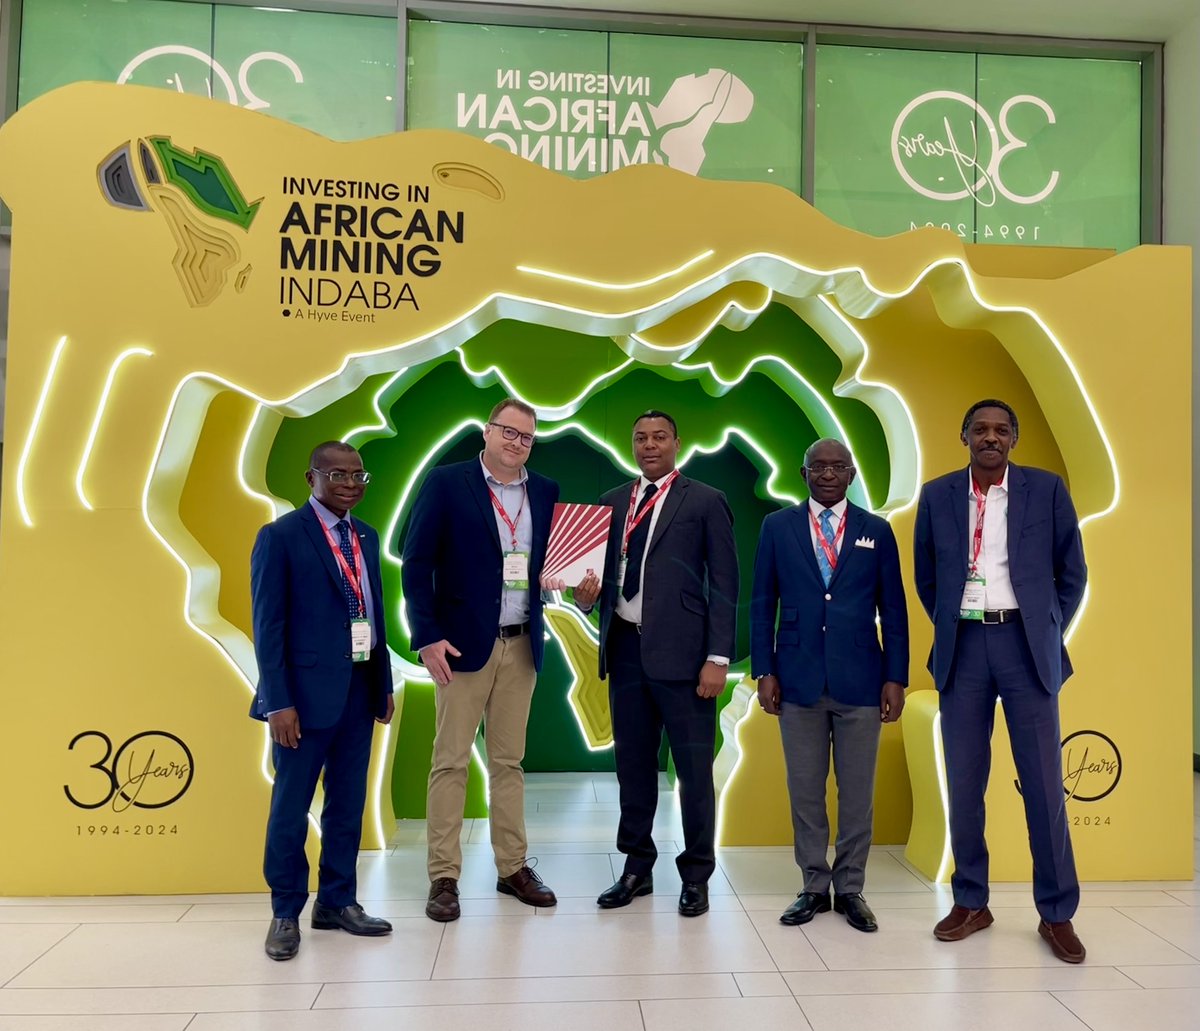 #menar signed an MOU with Société Equatoriale des Mines (SEM), the Gabonese state-owned mining company, at the #MiningIndaba today. The partnership aligns with Menar’s diversification strategy and will allow discussions on possible investment opportunities in the Gabonese mining